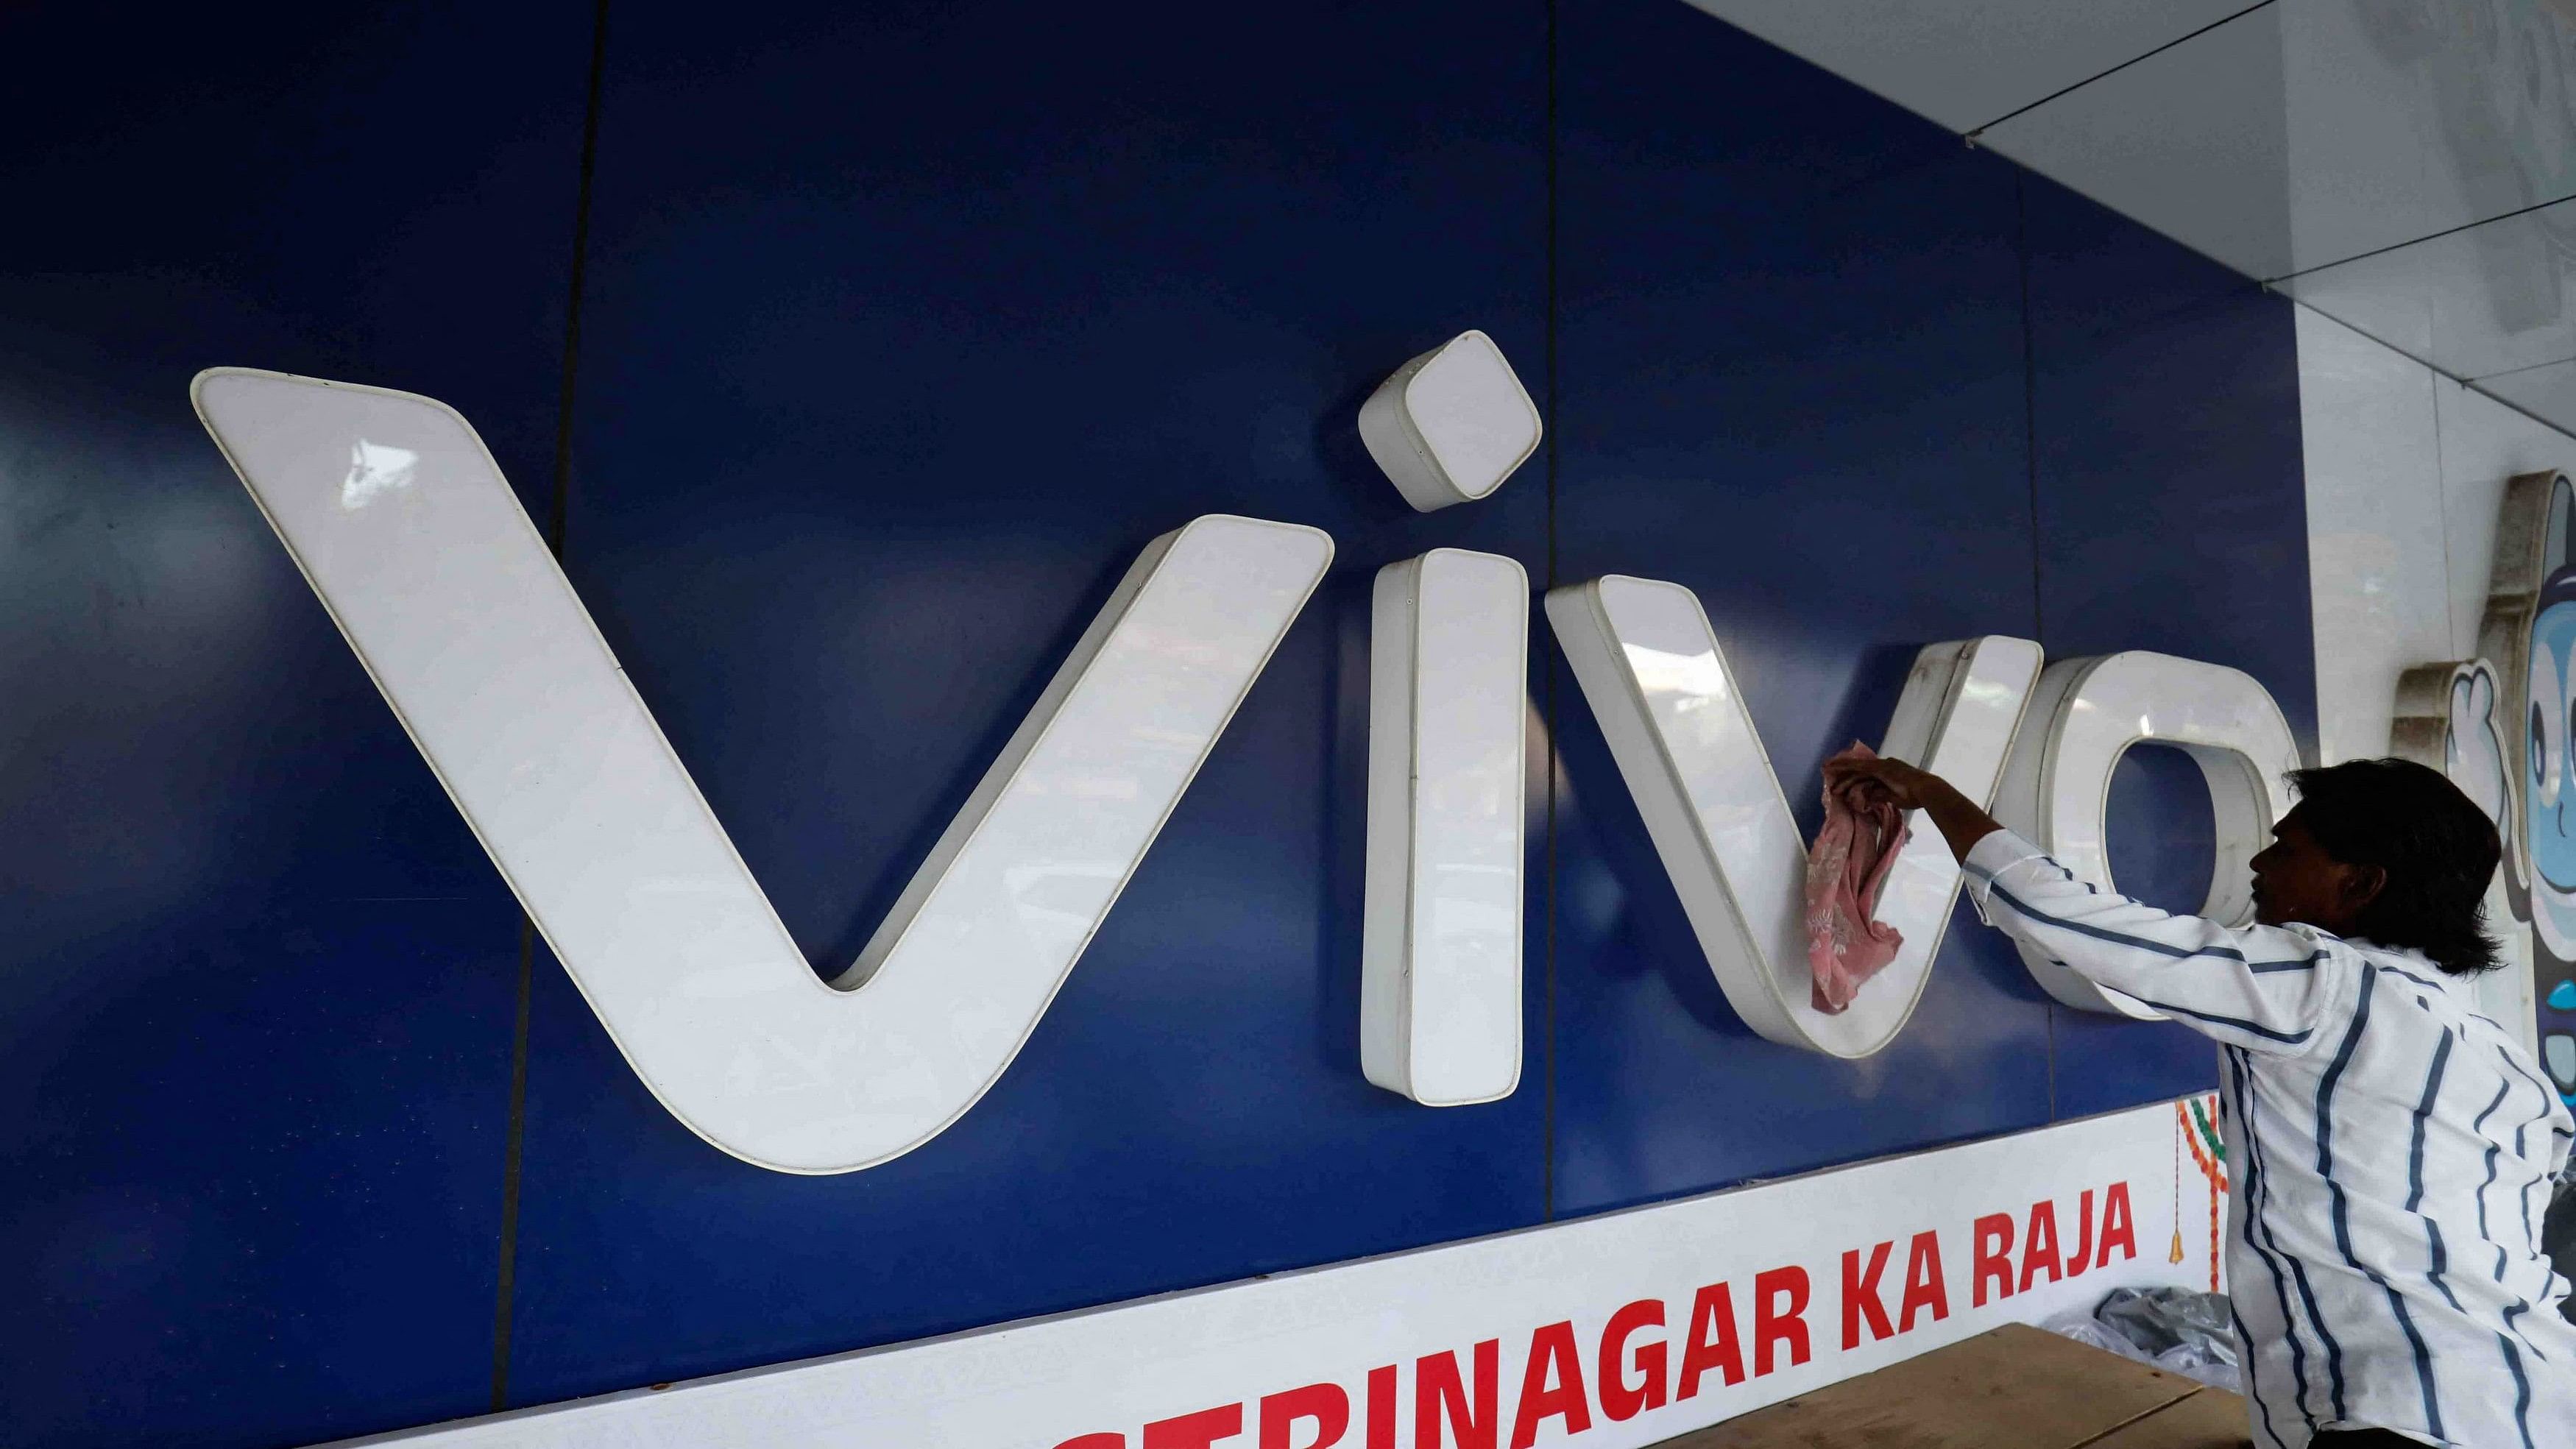 <div class="paragraphs"><p>A man cleans the logo of a Chinese smartphone brand Vivo outside a store in Ahmedabad.&nbsp;</p></div><div class="paragraphs"><p><strong><br></strong></p></div>